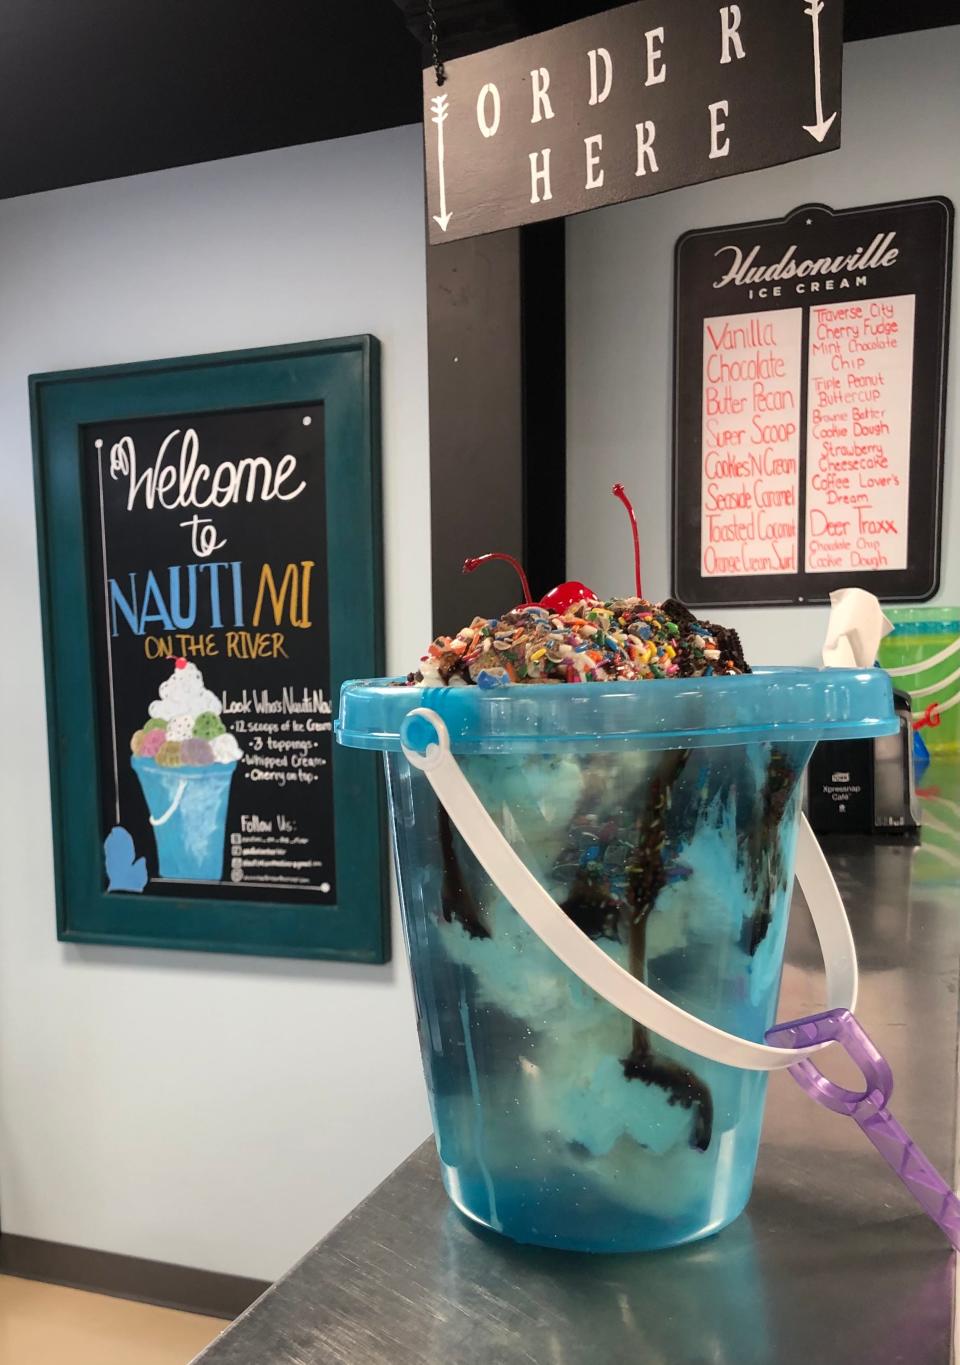 The "Look Who's Nauti Now" includes 12 scoops of ice cream, three toppings, whipped cream and cherries inside a sandcastle pail.